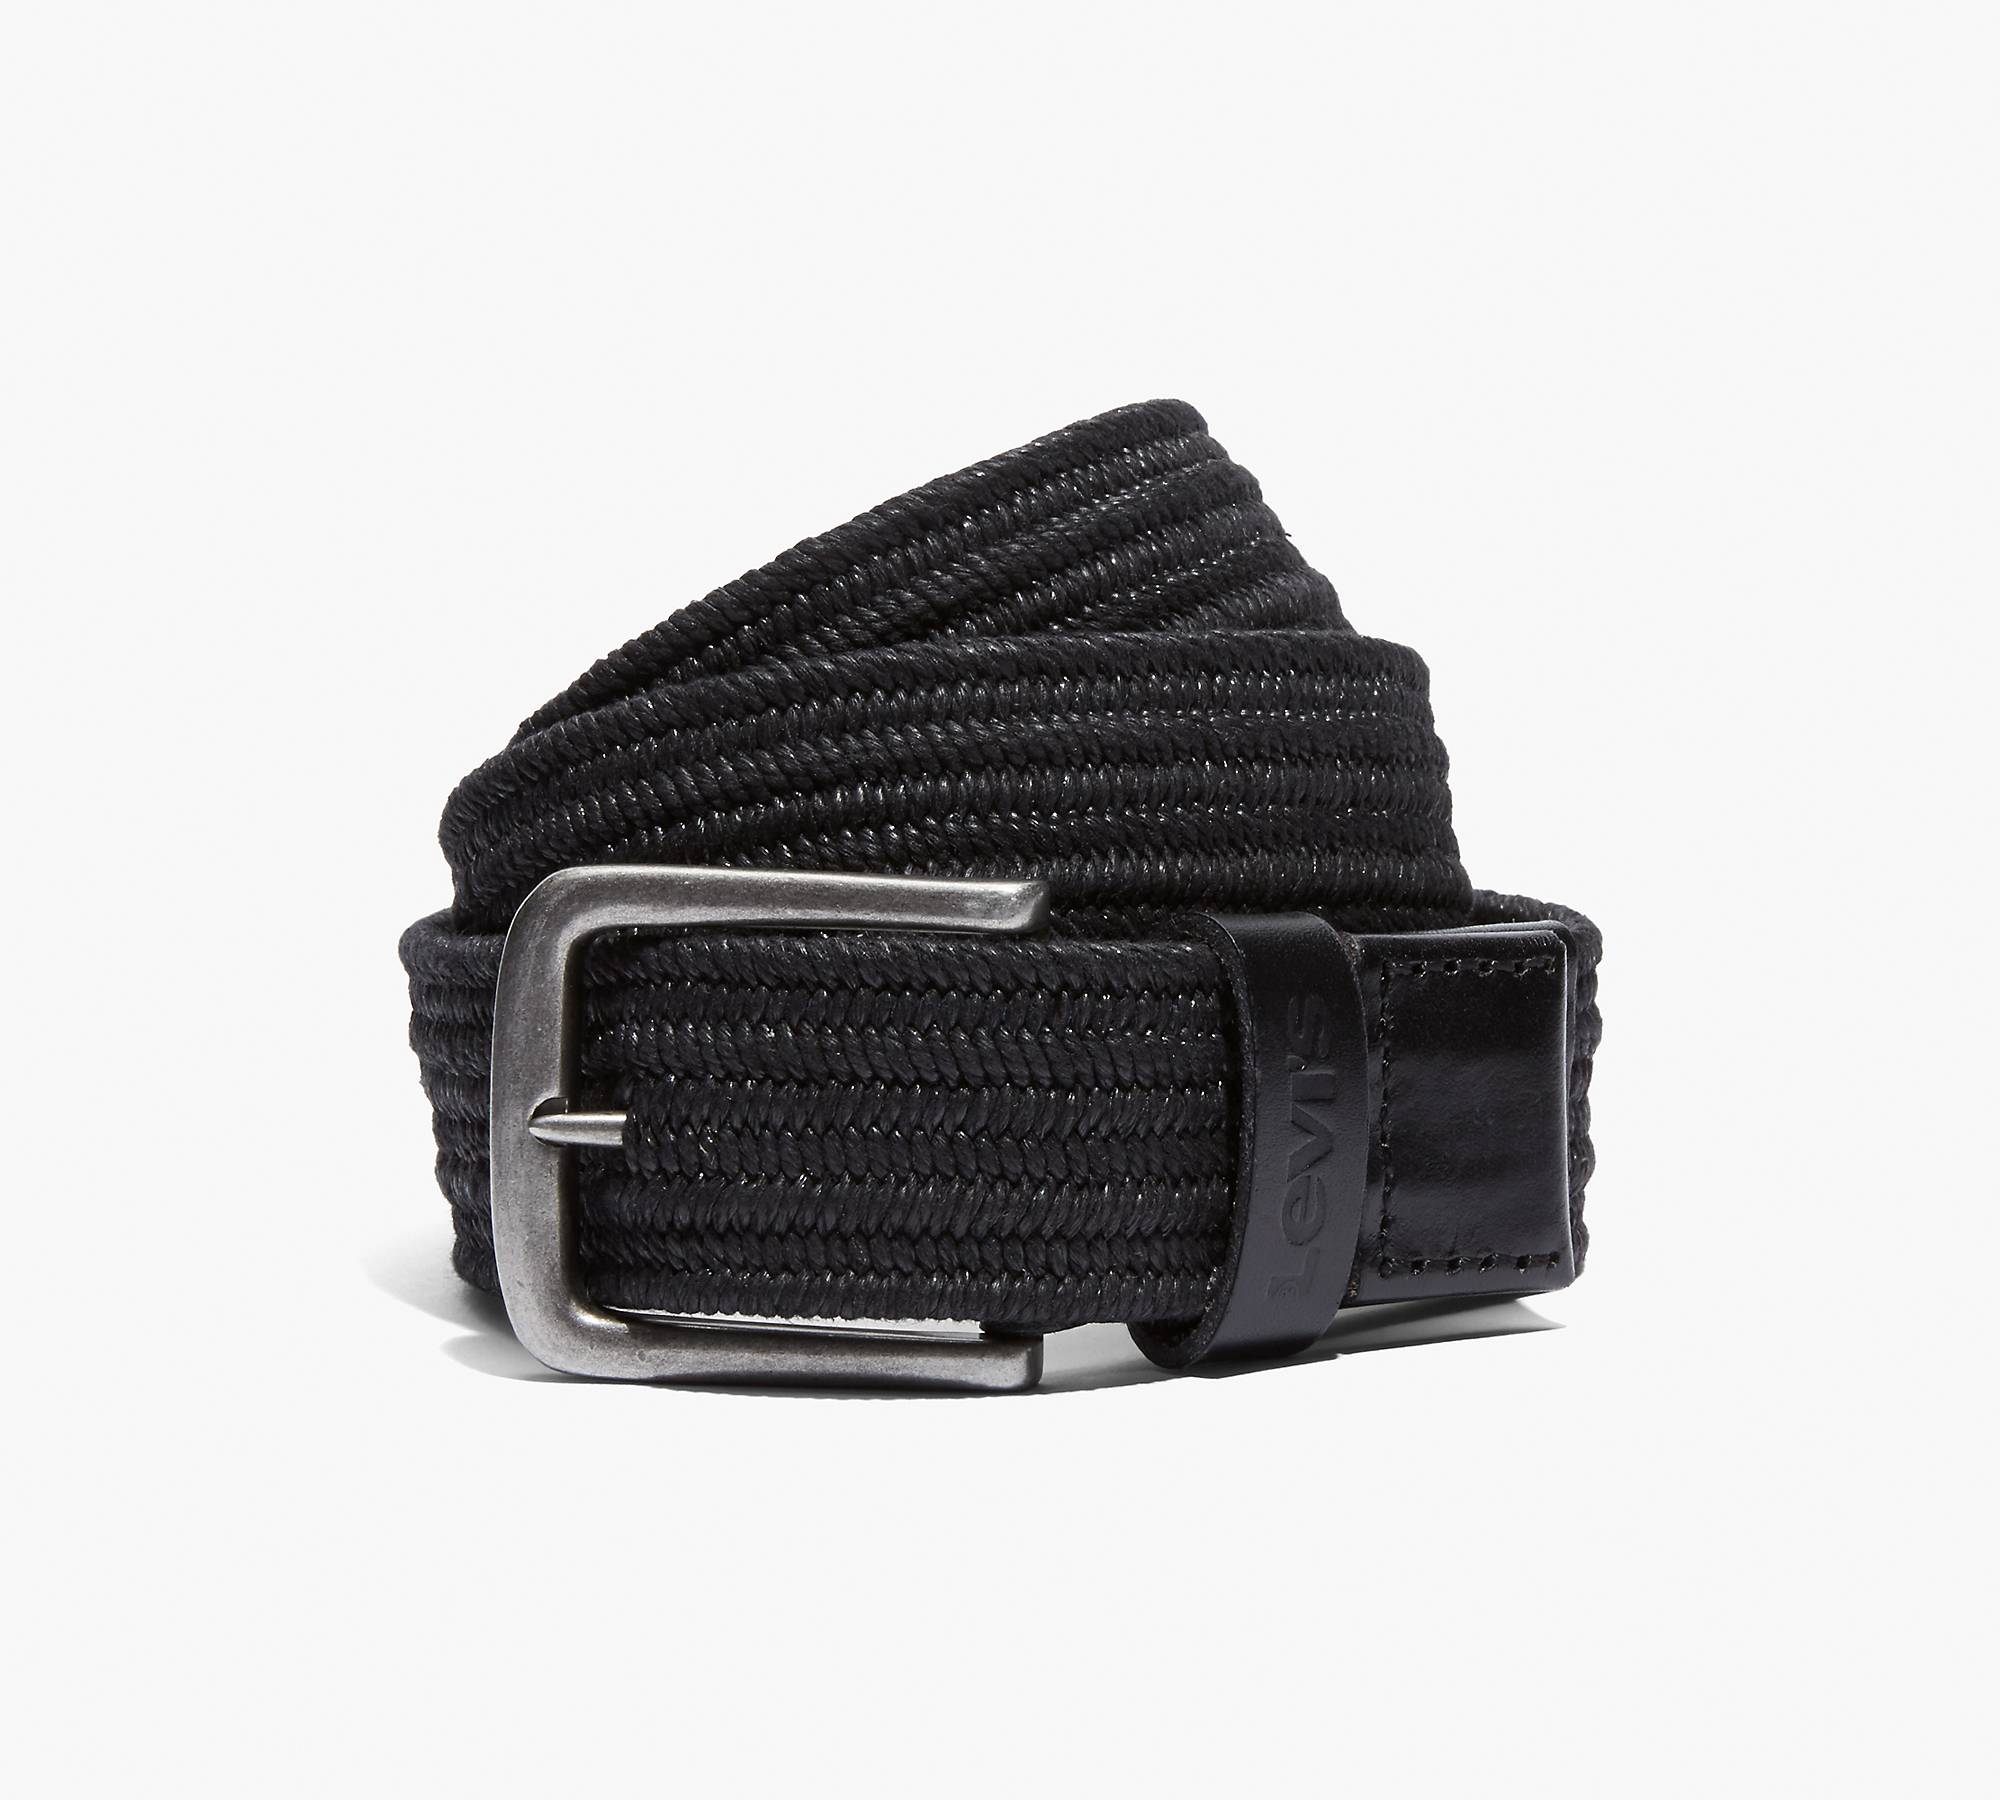 Armstrong Stretch Belt 1